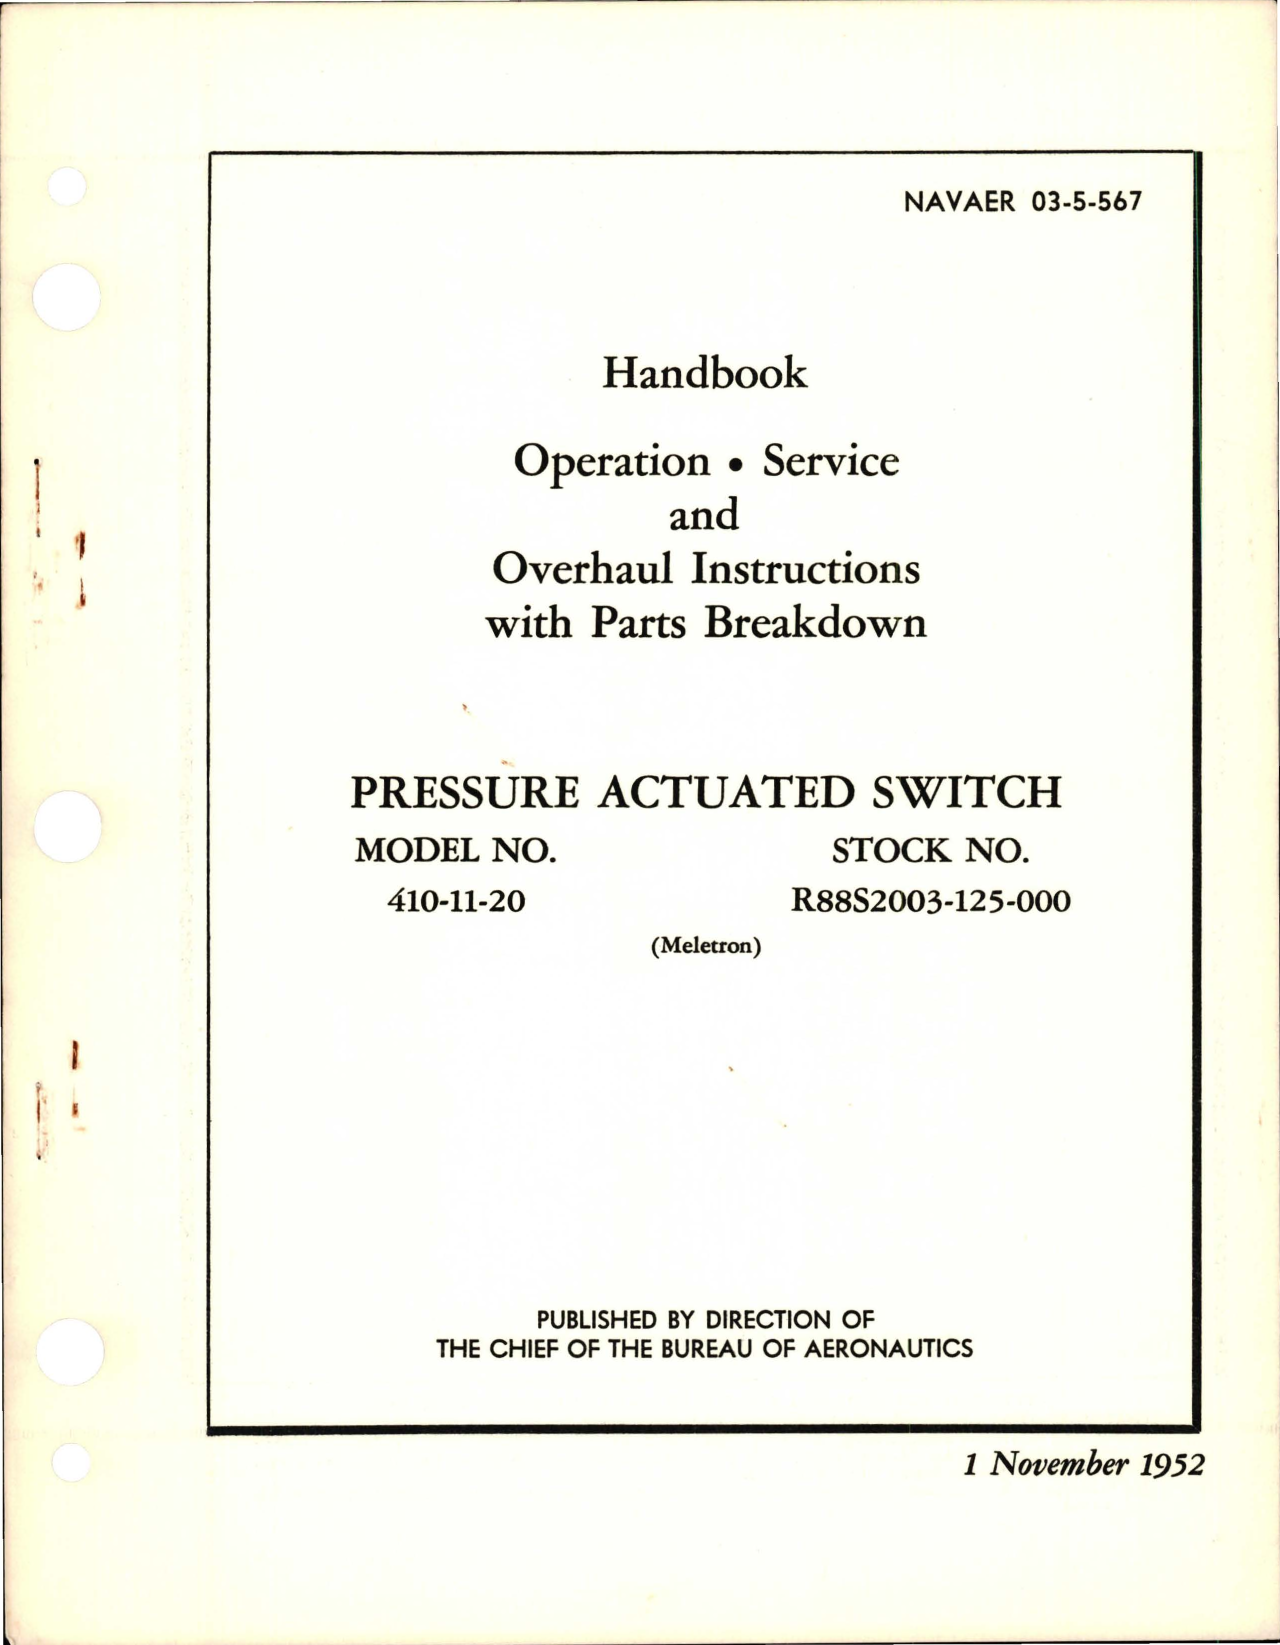 Sample page 1 from AirCorps Library document: Operation, Service and Overhaul Instructions with Parts Breakdown for Pressure Actuated Switch - Model 410-11-20 